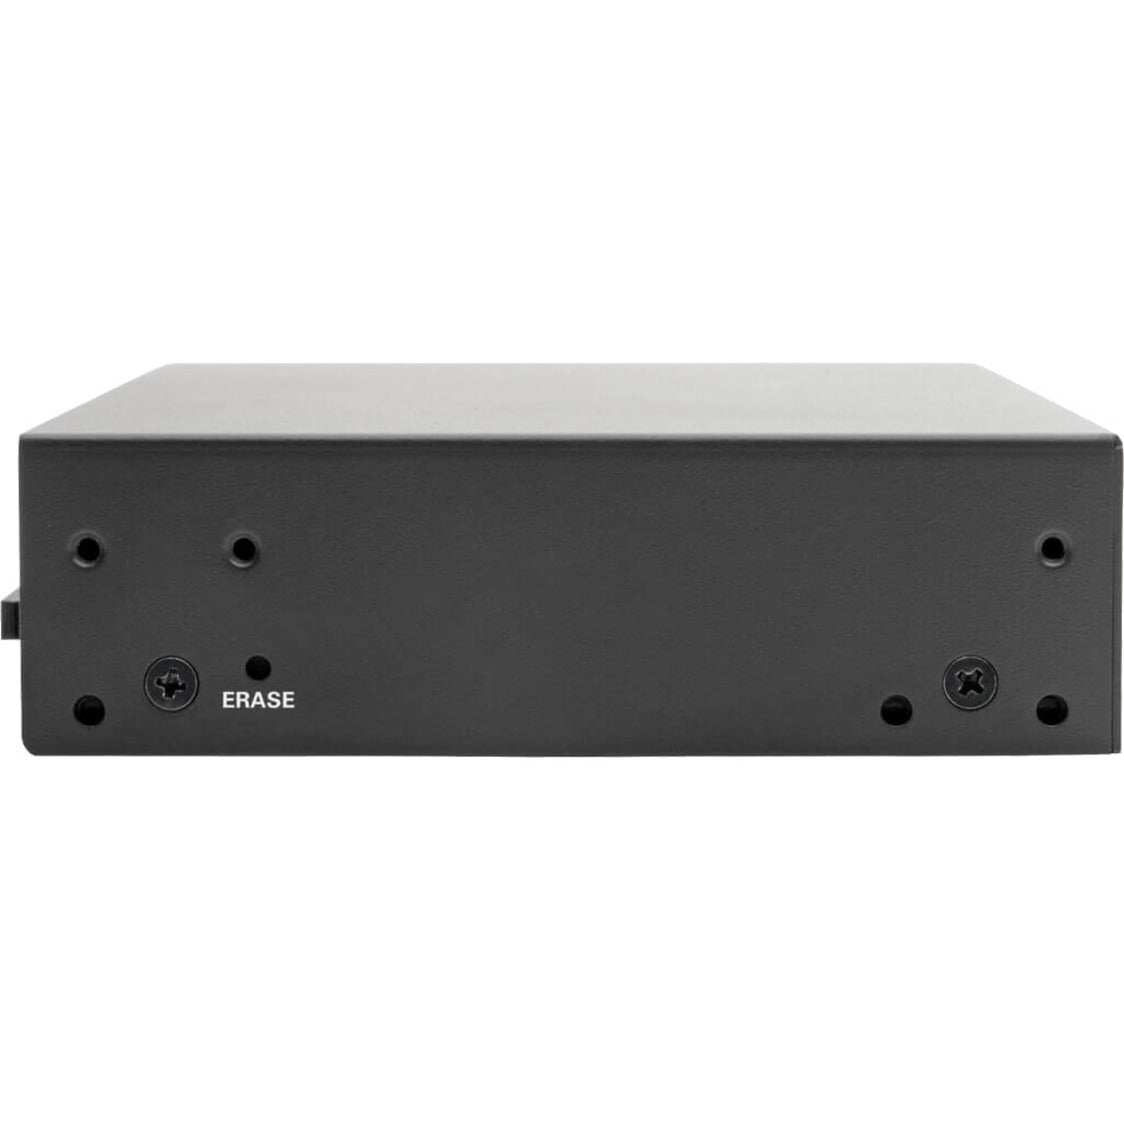 Tripp Lite 4-Port Console Server with Dual GB NIC 4G Flash and 4 USB Ports